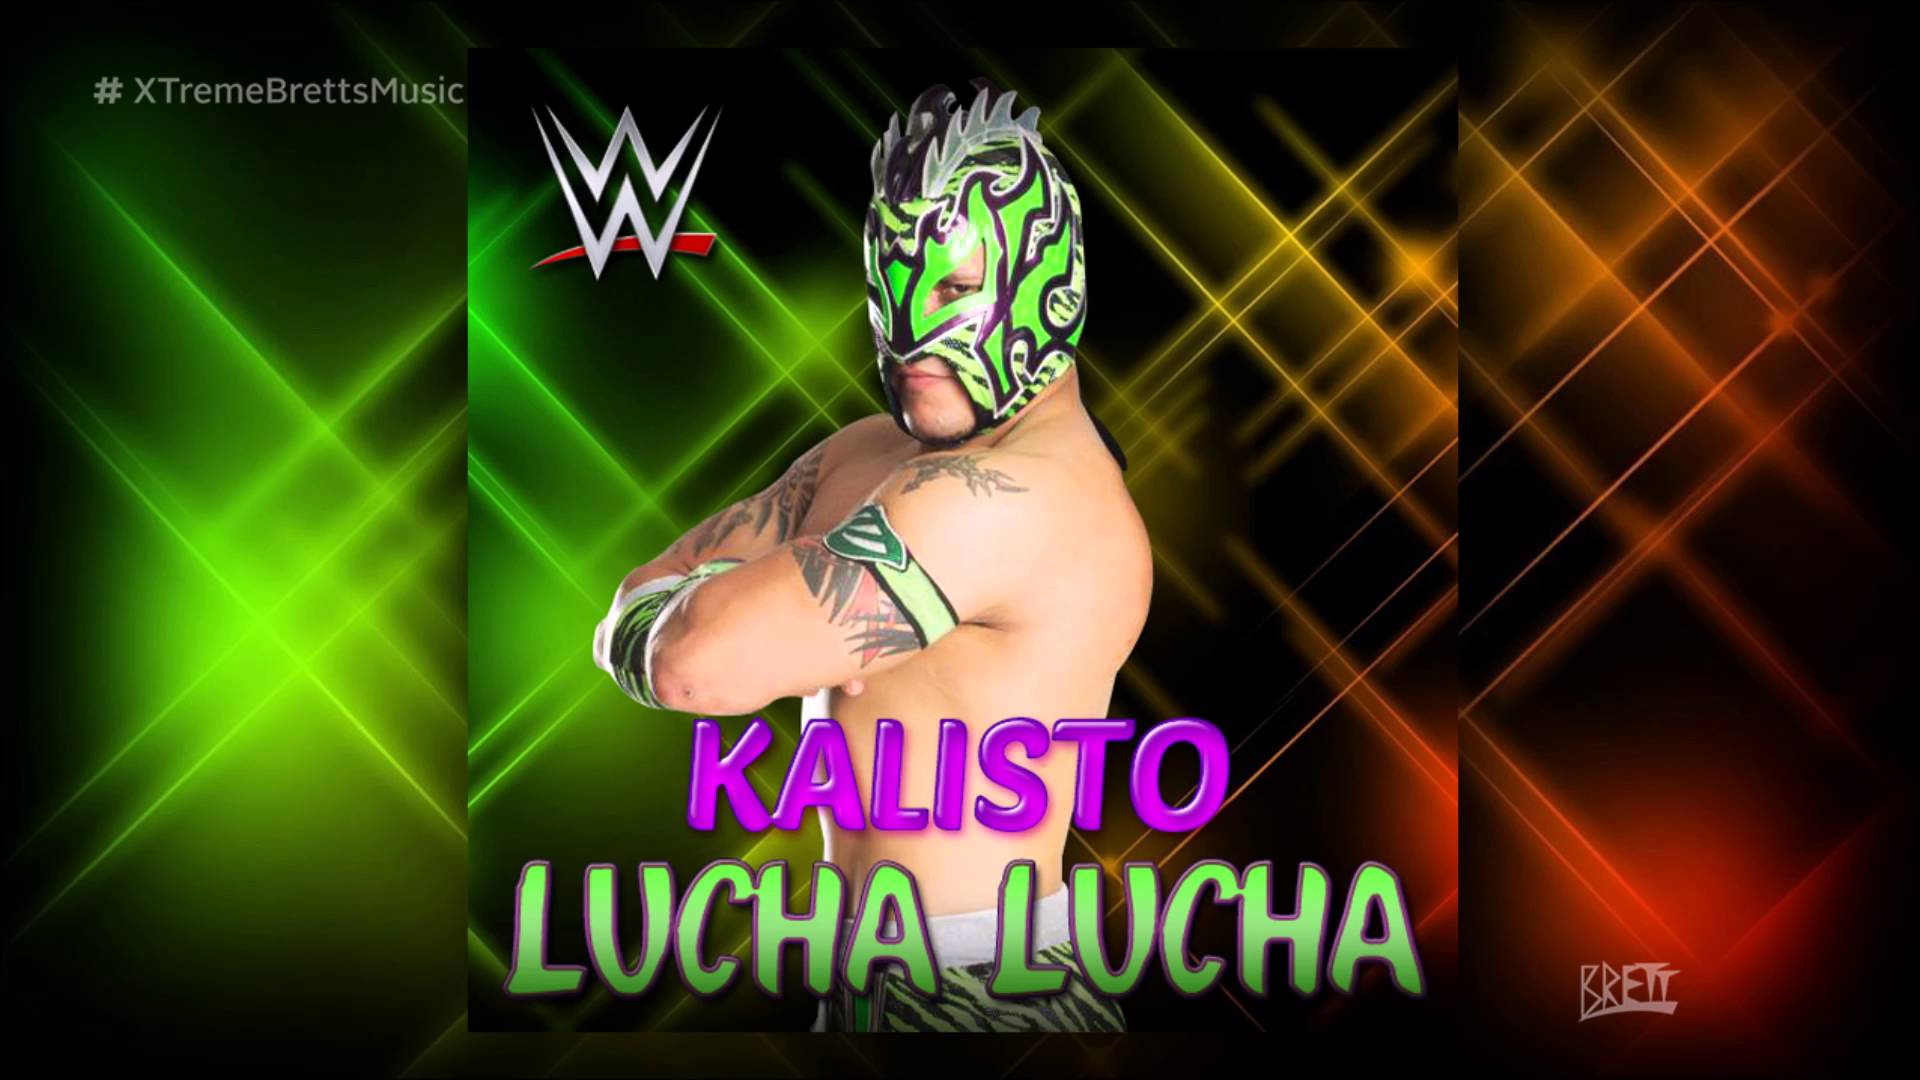 WWE: Lucha Lucha [iTunes Release] by CFO$ ▻ Kalisto Theme Song